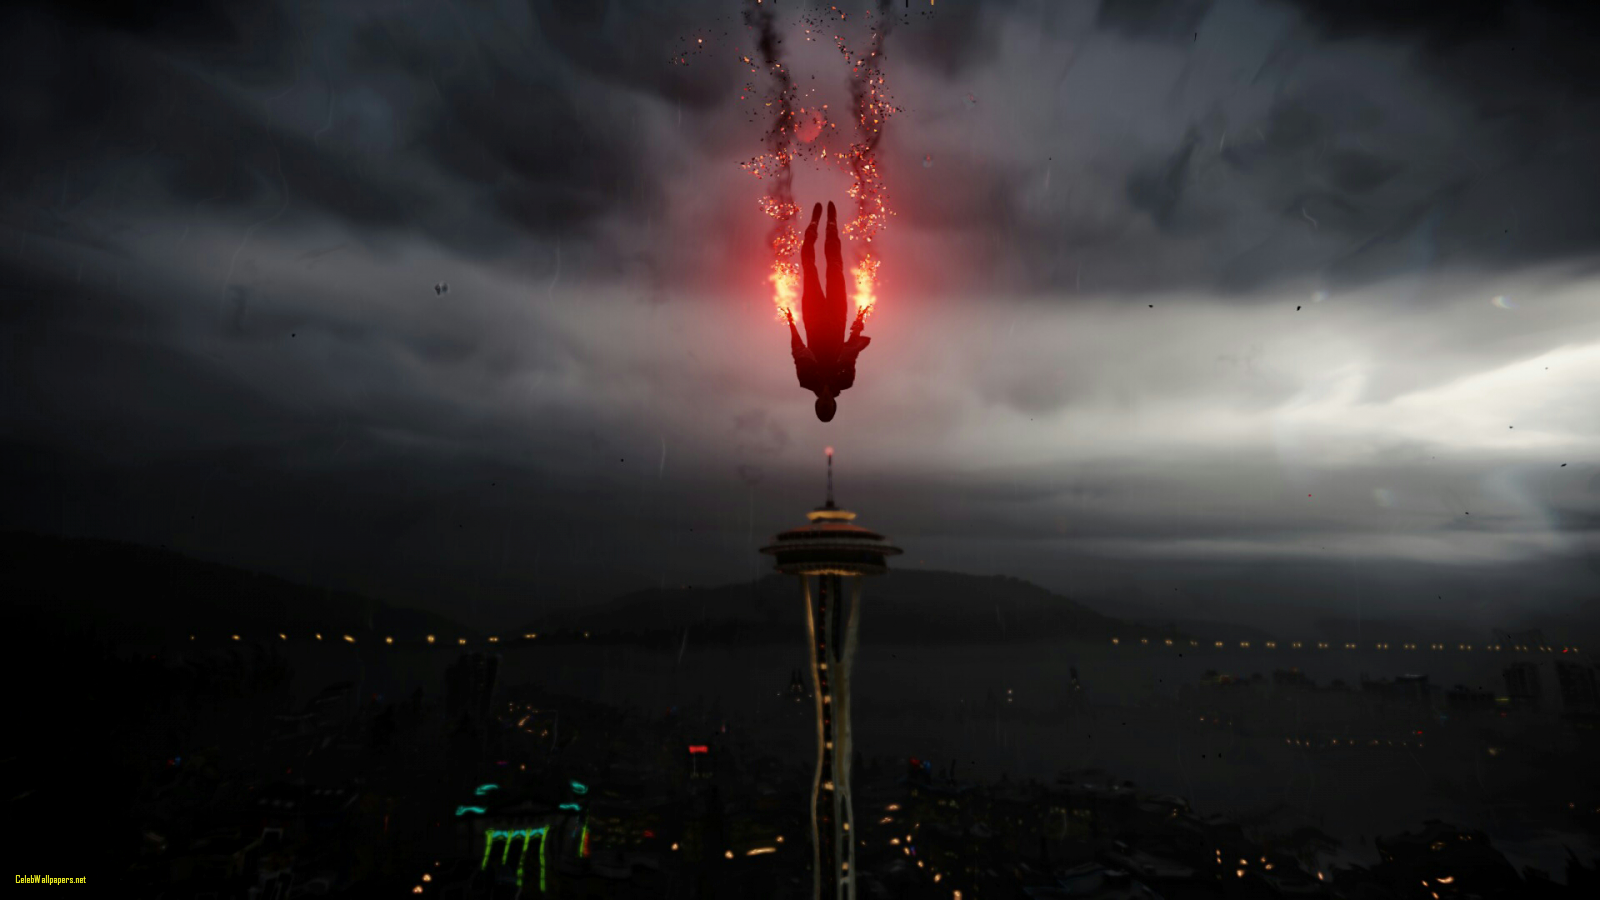 infamous second son wallpaper hd,sky,red,geological phenomenon,cloud,night